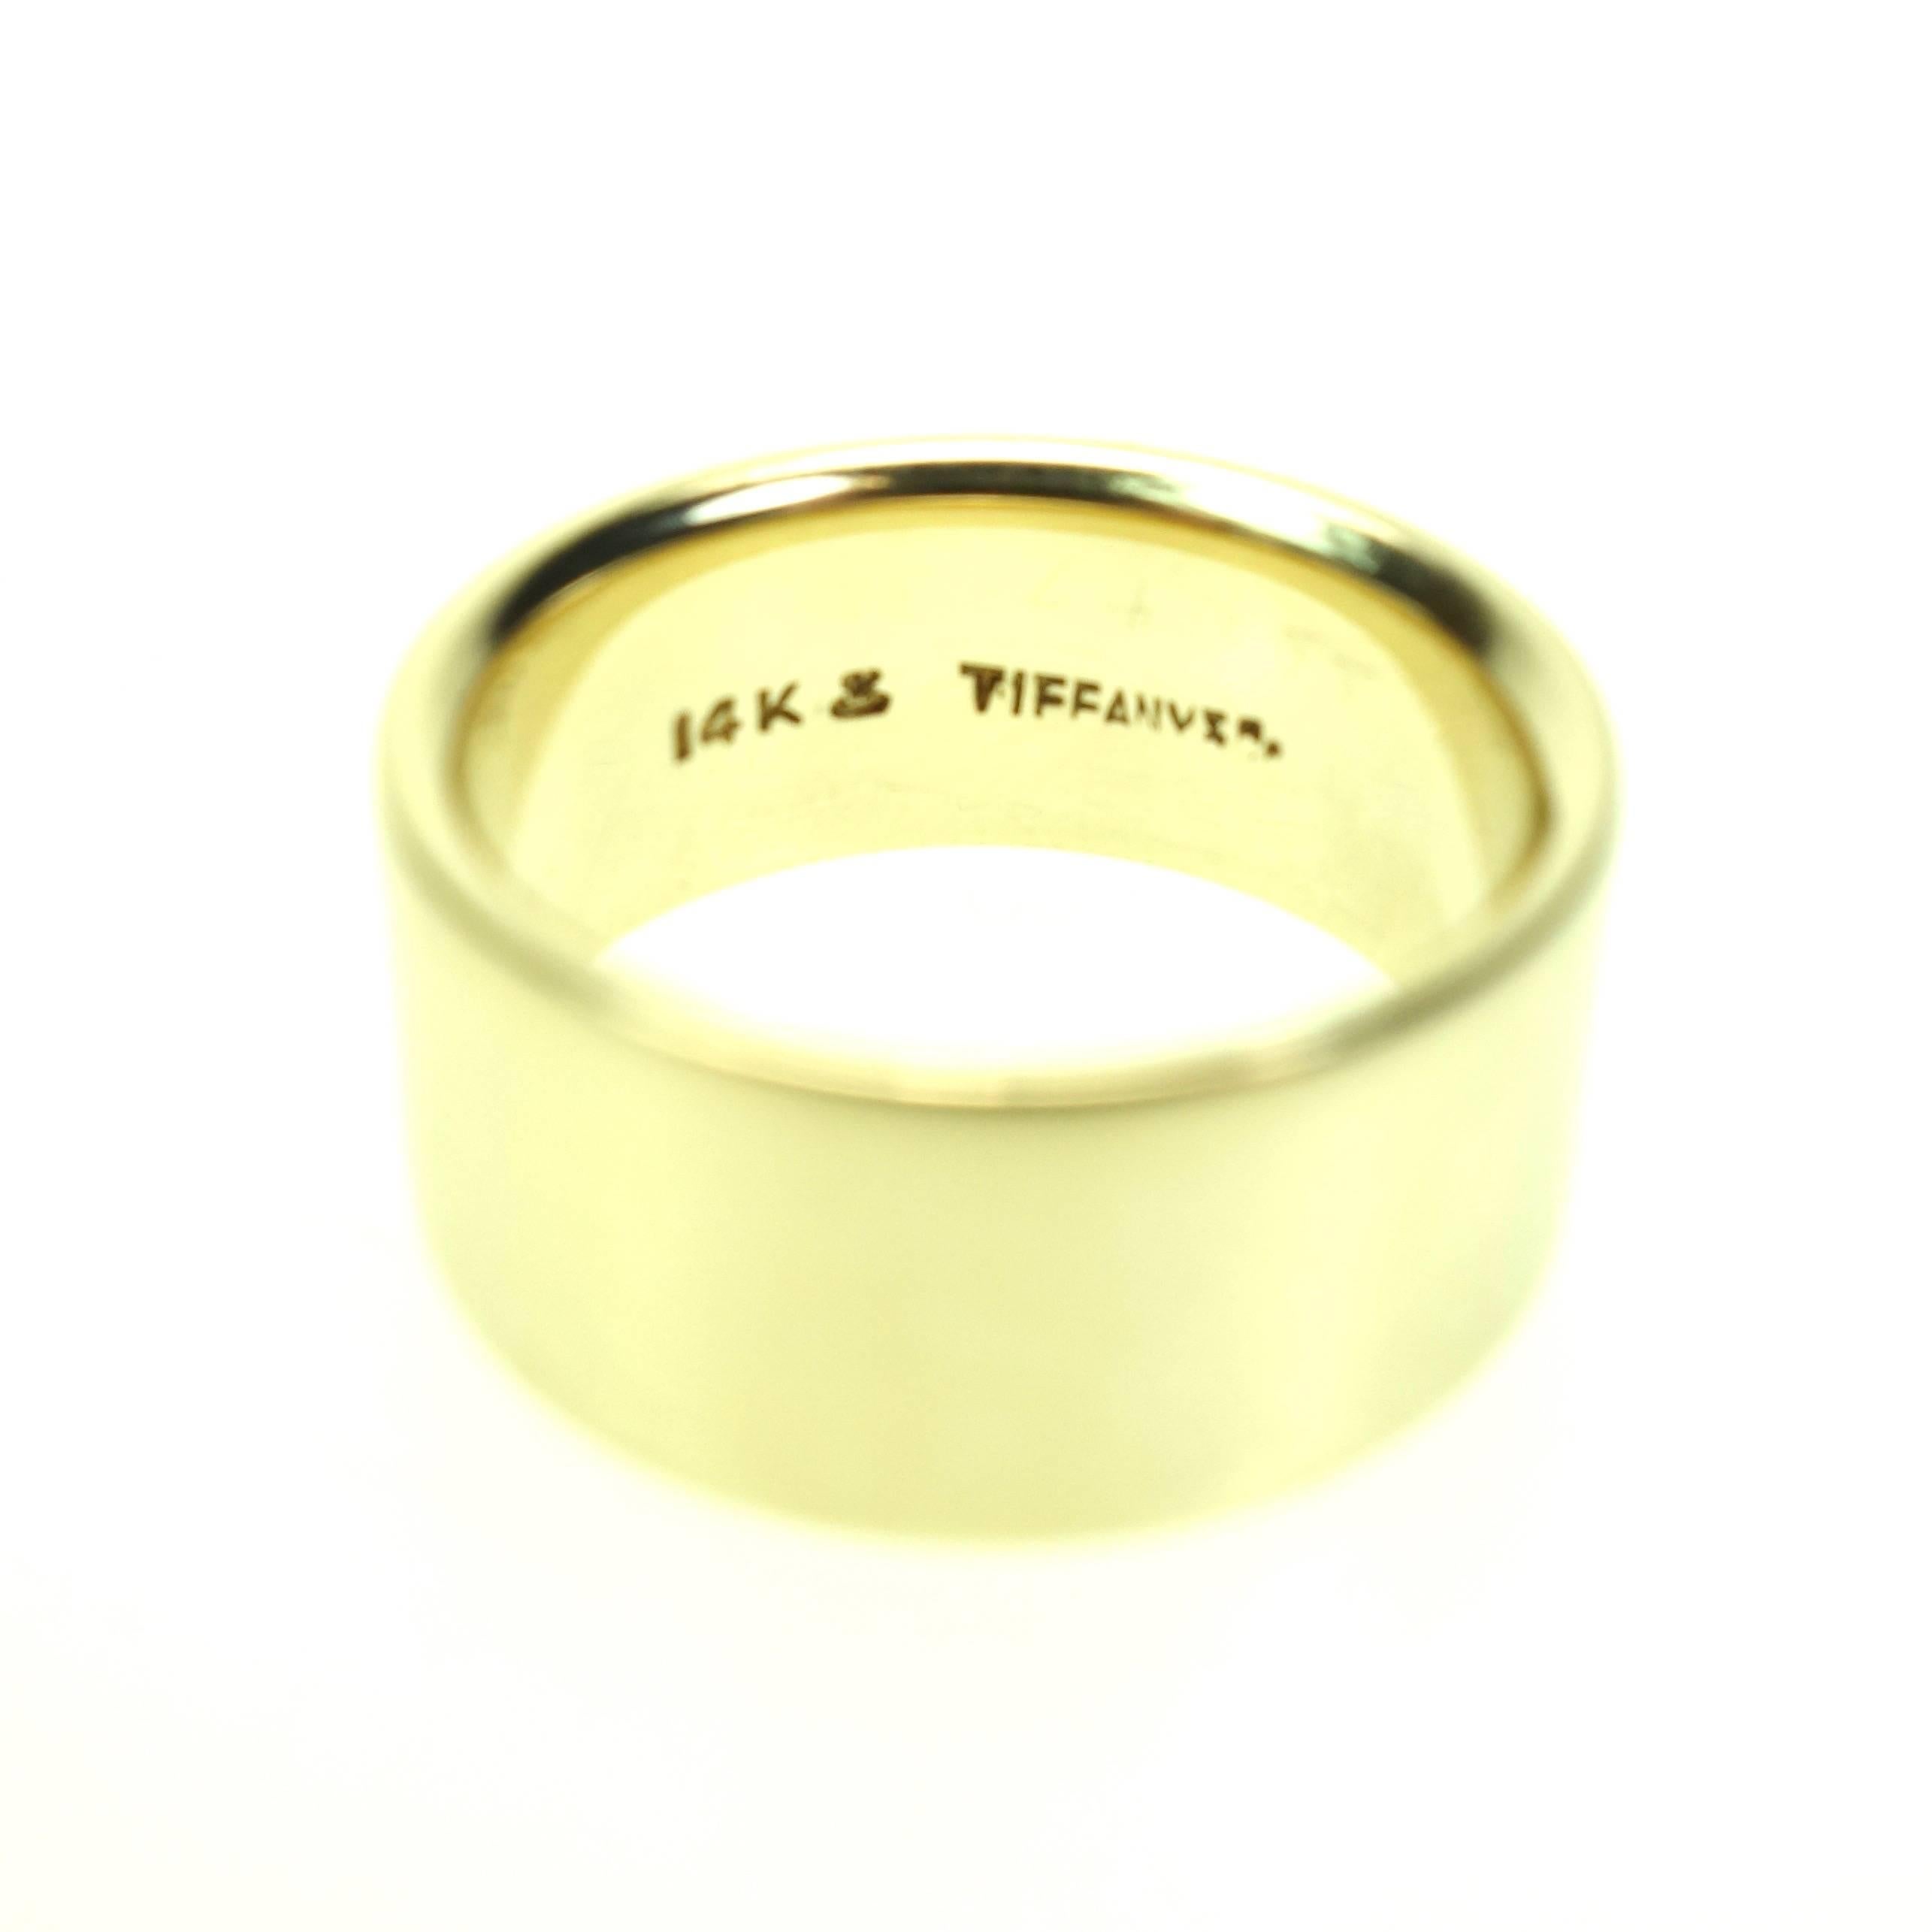 Rare vintage Tiffany & Co 14K yellow gold wedding band.
Weight: 7.8 grams
Size: 4.5
Marked: Tiffany & Co 14K
Condition: Excellent pre-owned. Professionaly cleaned and polished. 
